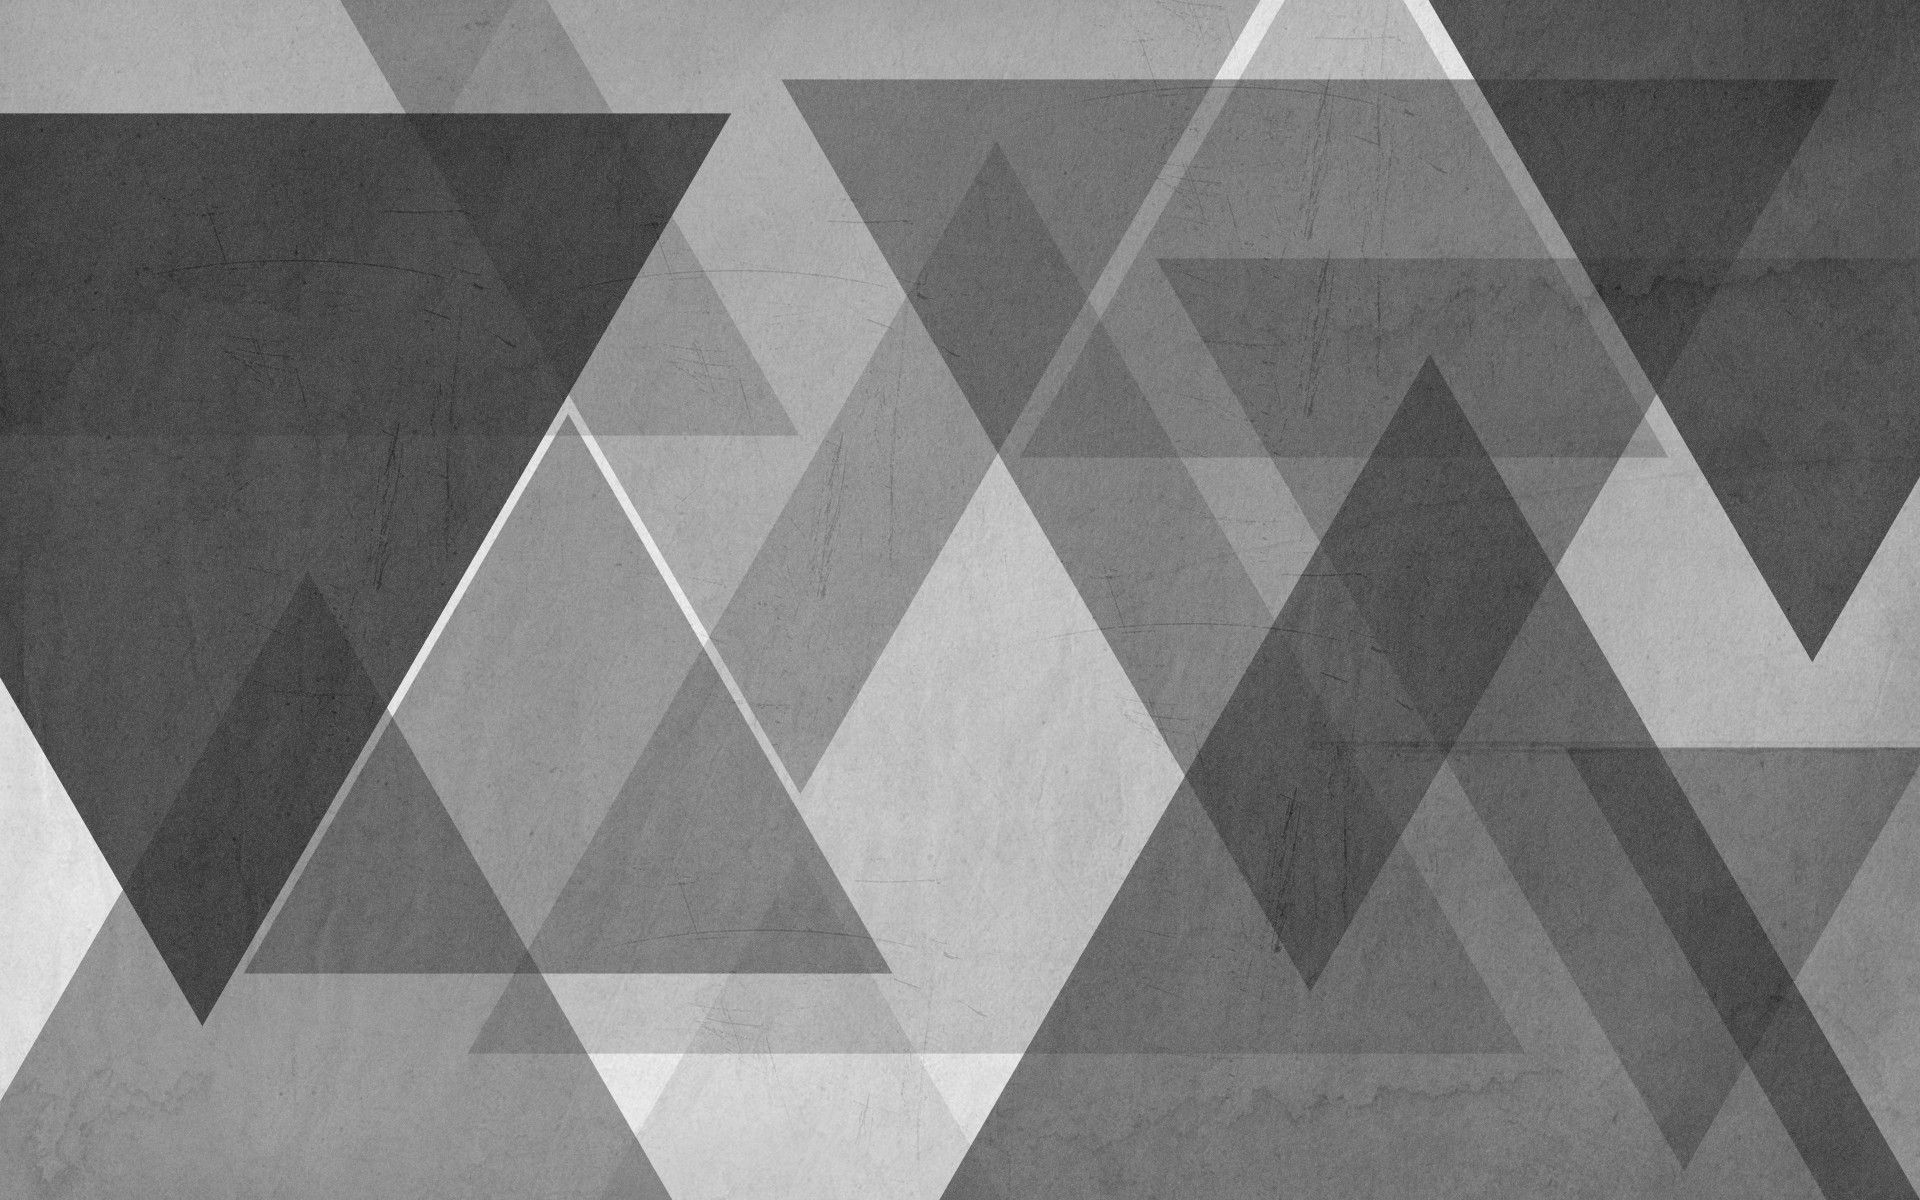 Grey Wallpaper Free Download Cool Images 4k Artwork Abstract Wallpaper Grey 1068542 Hd Wallpaper Backgrounds Download Browse millions of popular black wallpapers and ringtones on zedge and personalize your phone to suit you. 4k artwork abstract wallpaper grey